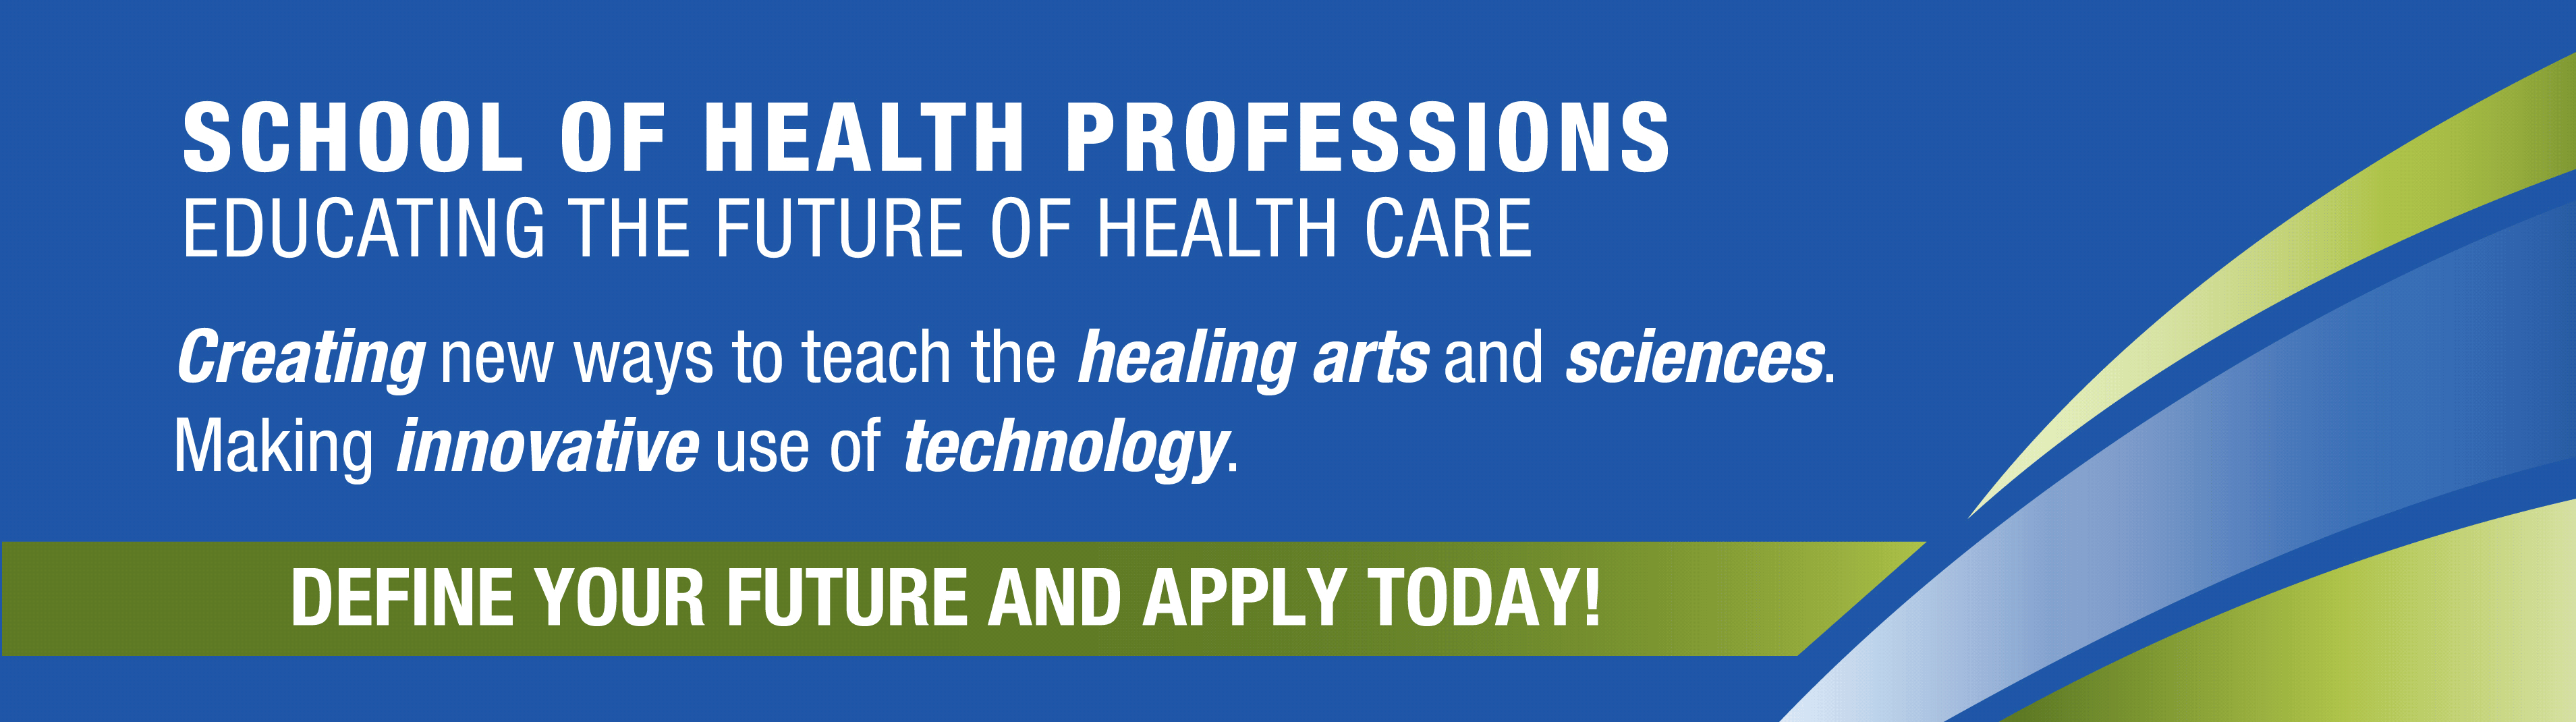 School of Health Professions - Educating the Future of Health Care. Creating new ways to teach the healing arts and sciences. Making innovative use of technology. Define your future and apply today